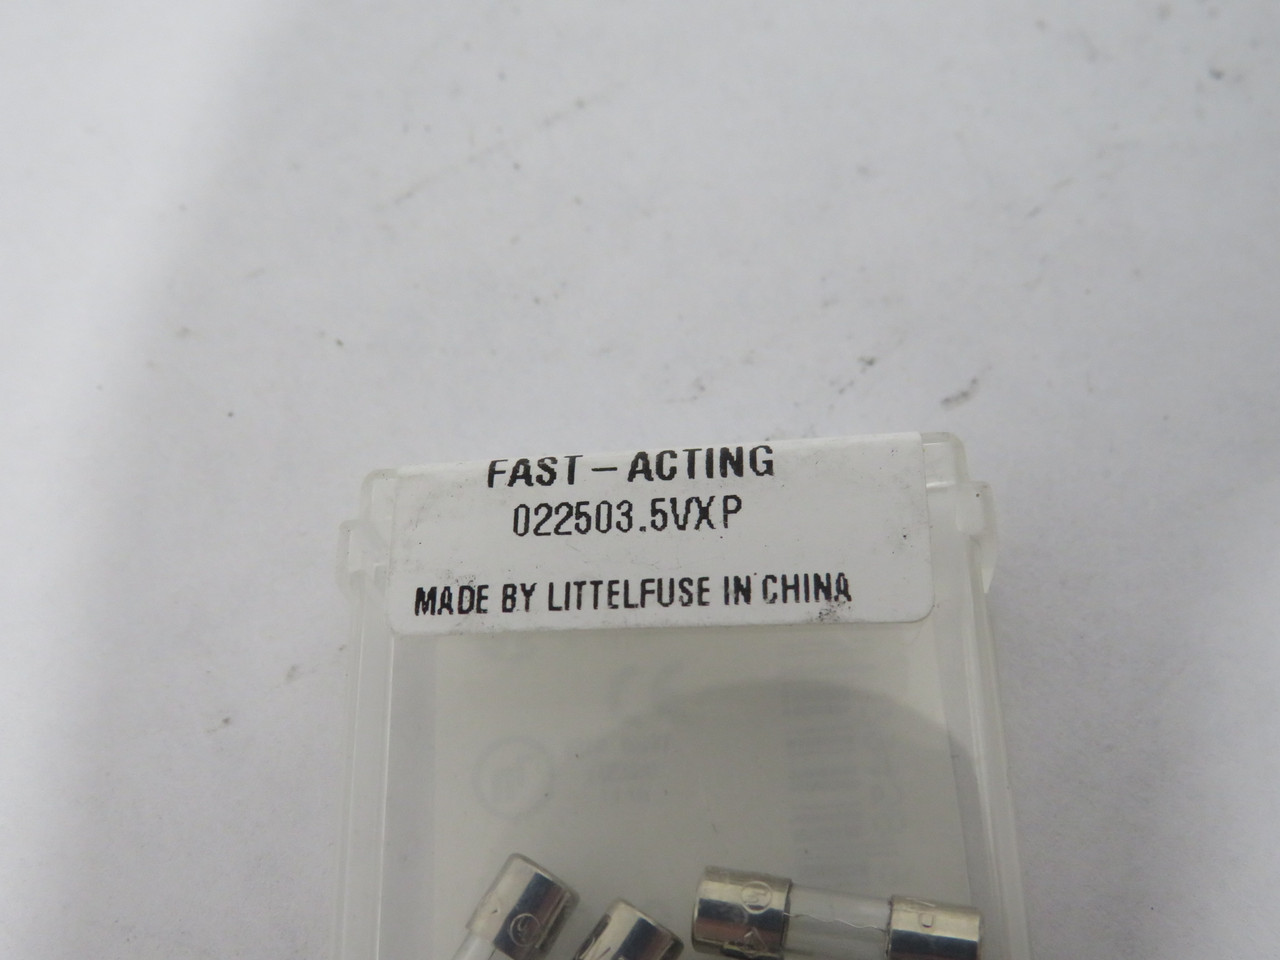 Littelfuse 022503.5VXP Fast Acting Glass Fuse 3-1/2A 250VAC 5-Pack NEW